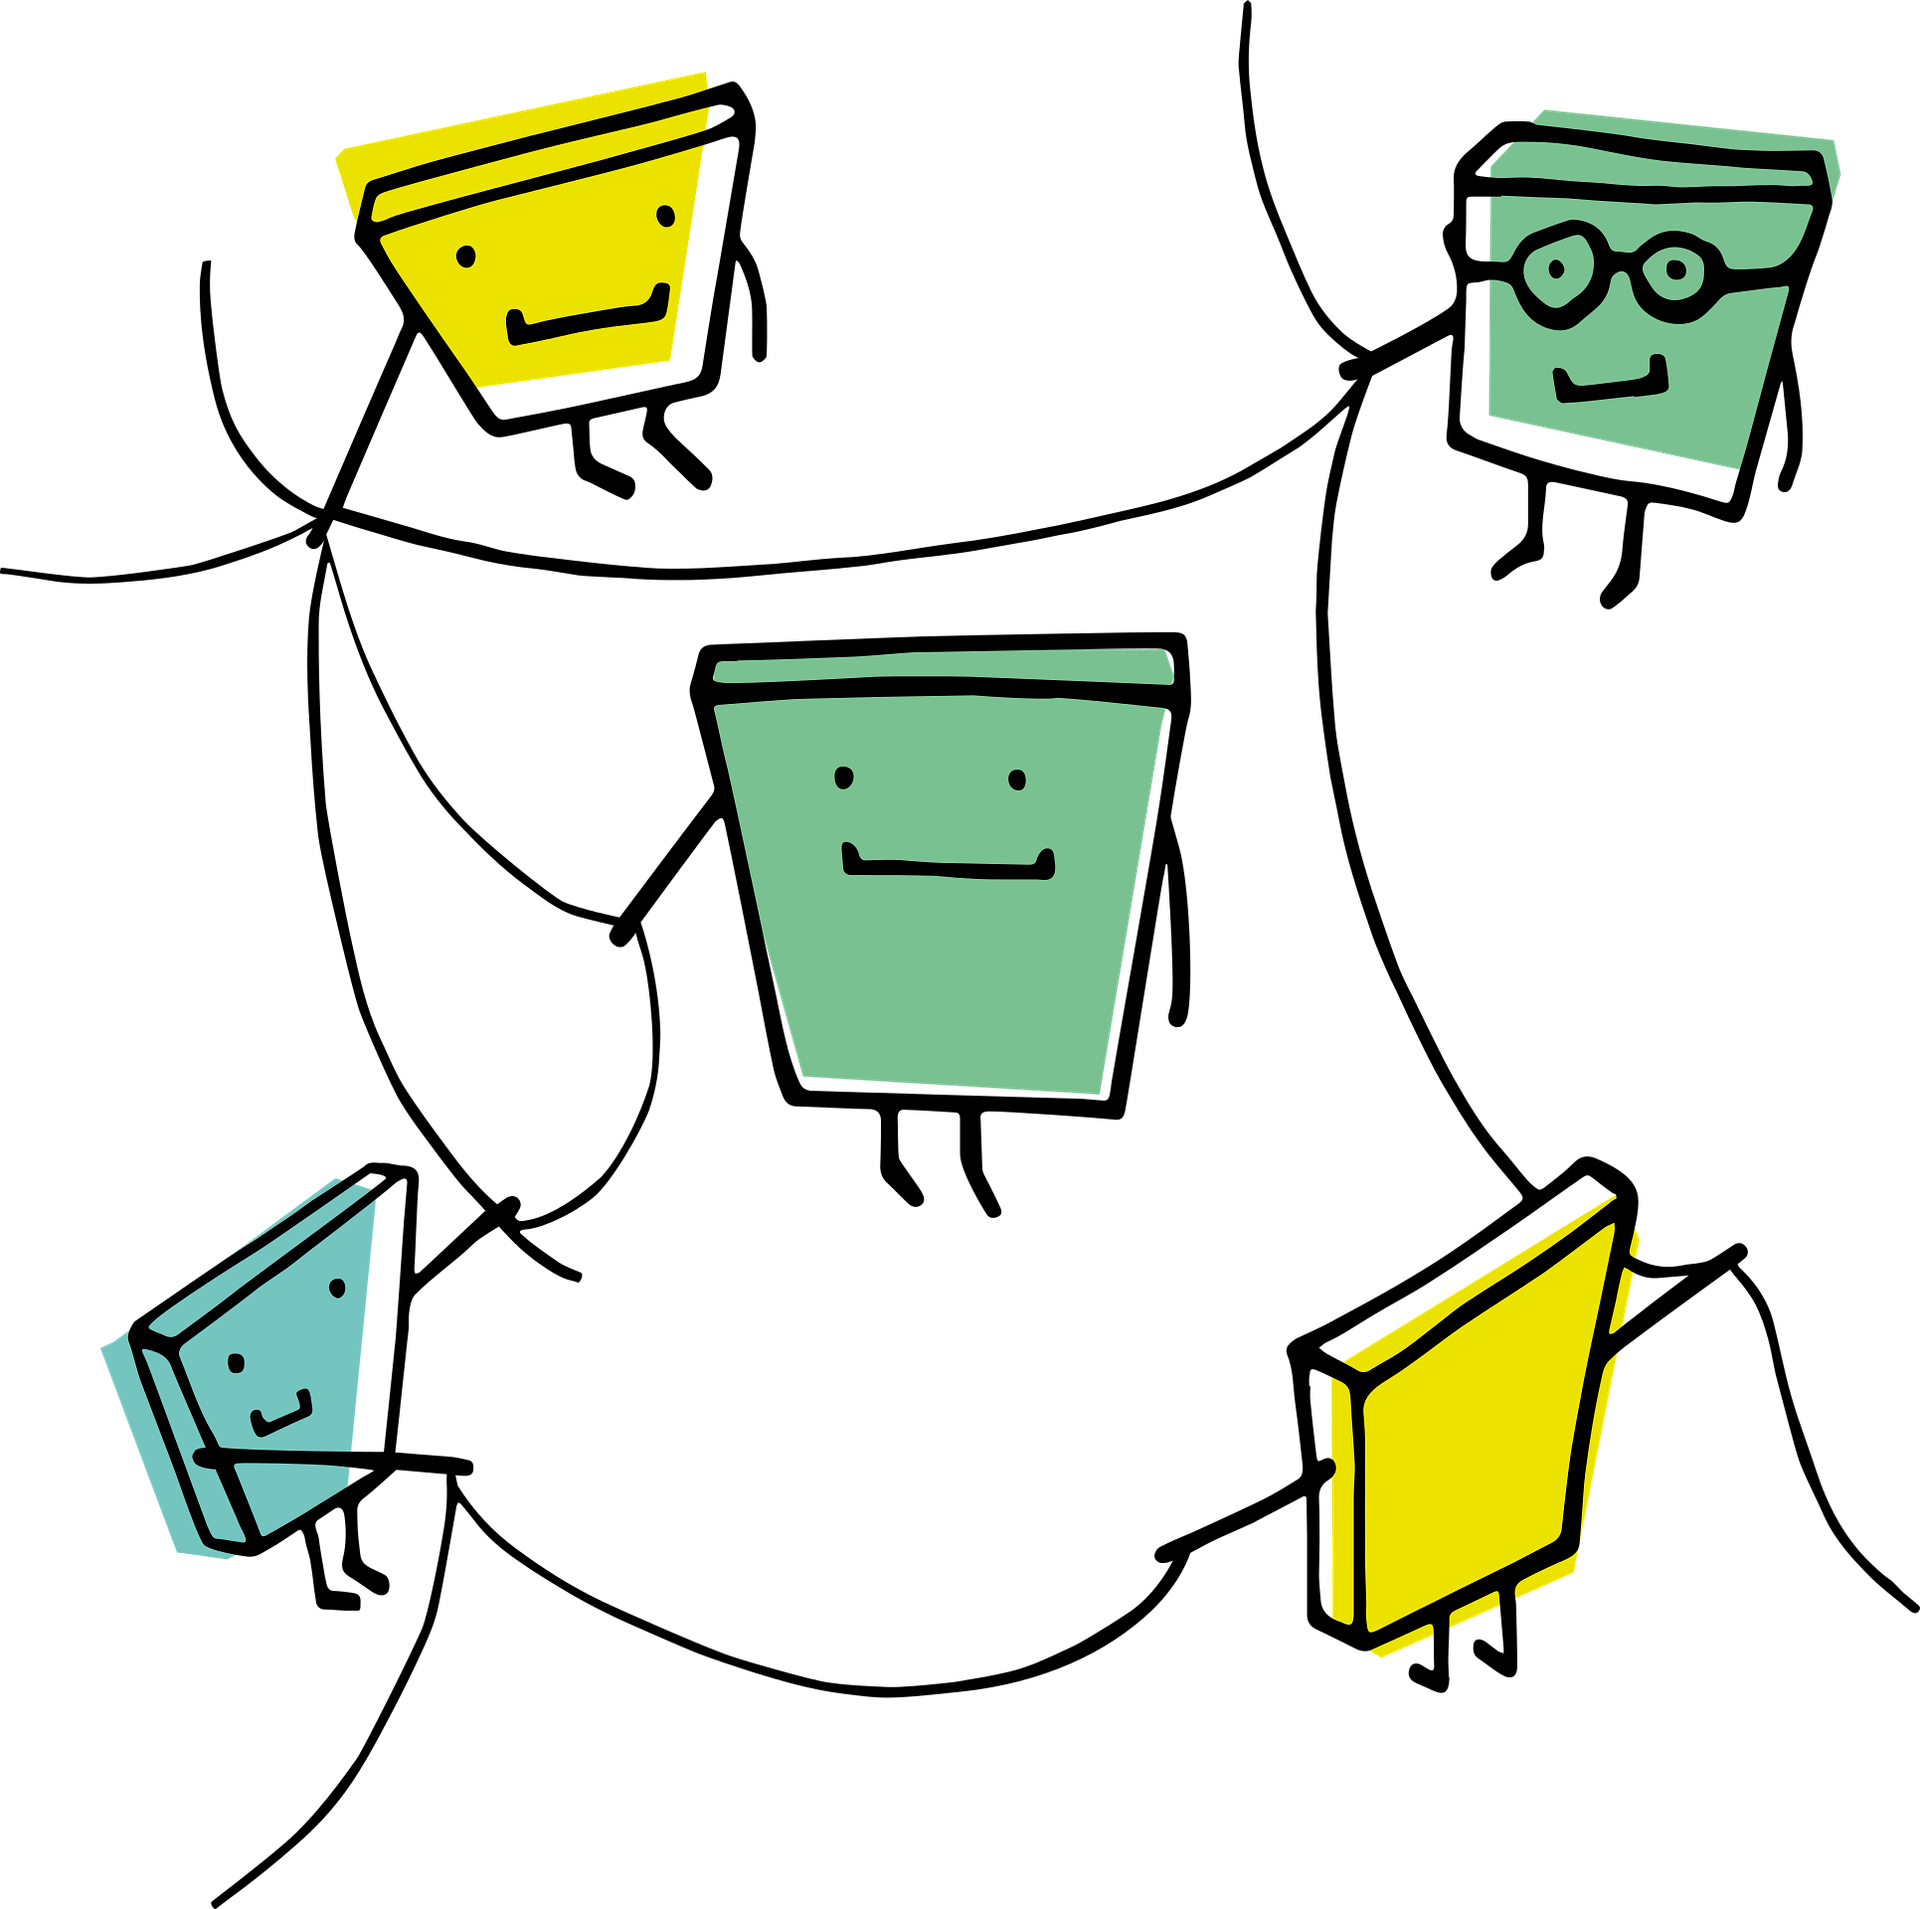 an image of five connected blocks that have smiling faces. they are connected by a piece of sring